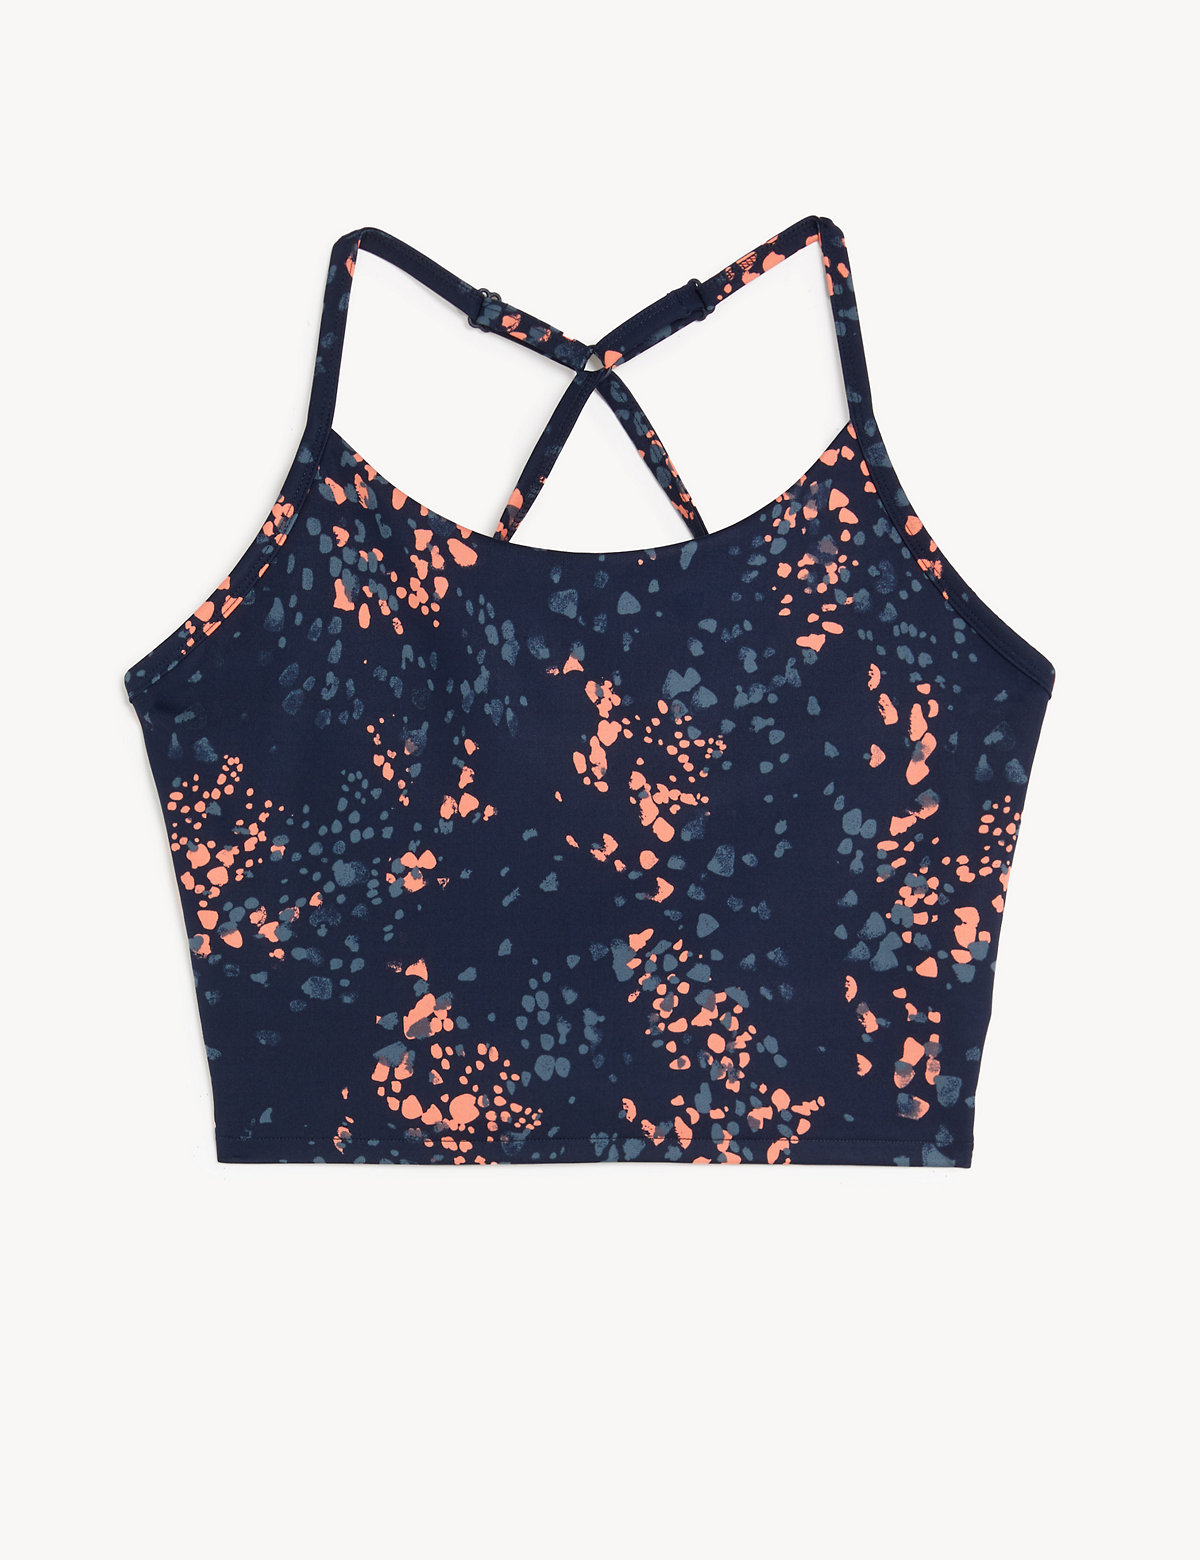 Printed Strappy Cross Back Crop Top